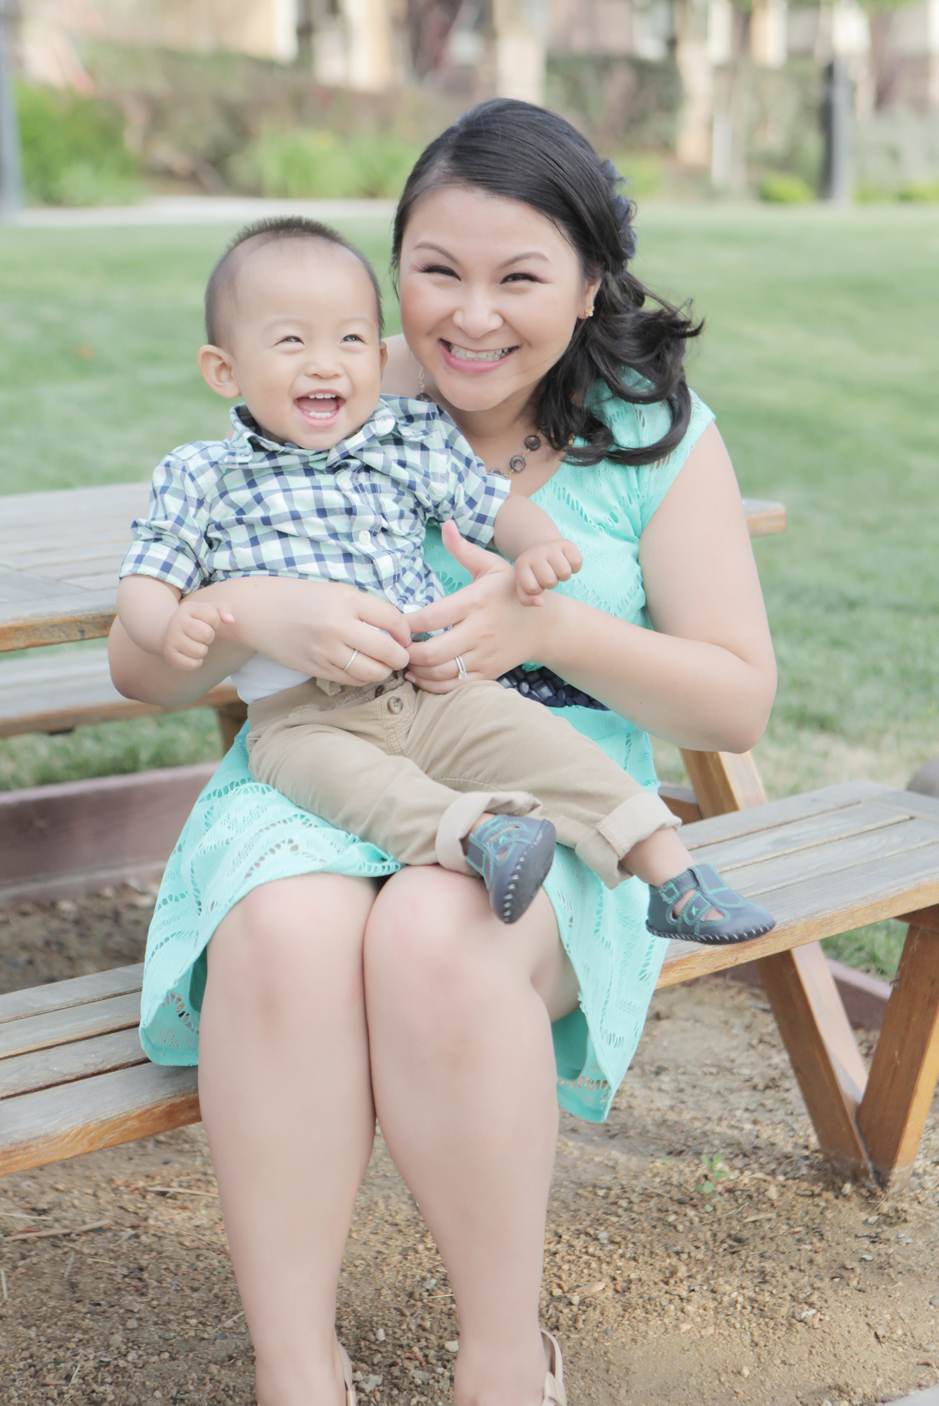 Photoshoot of Ngoc and her Son